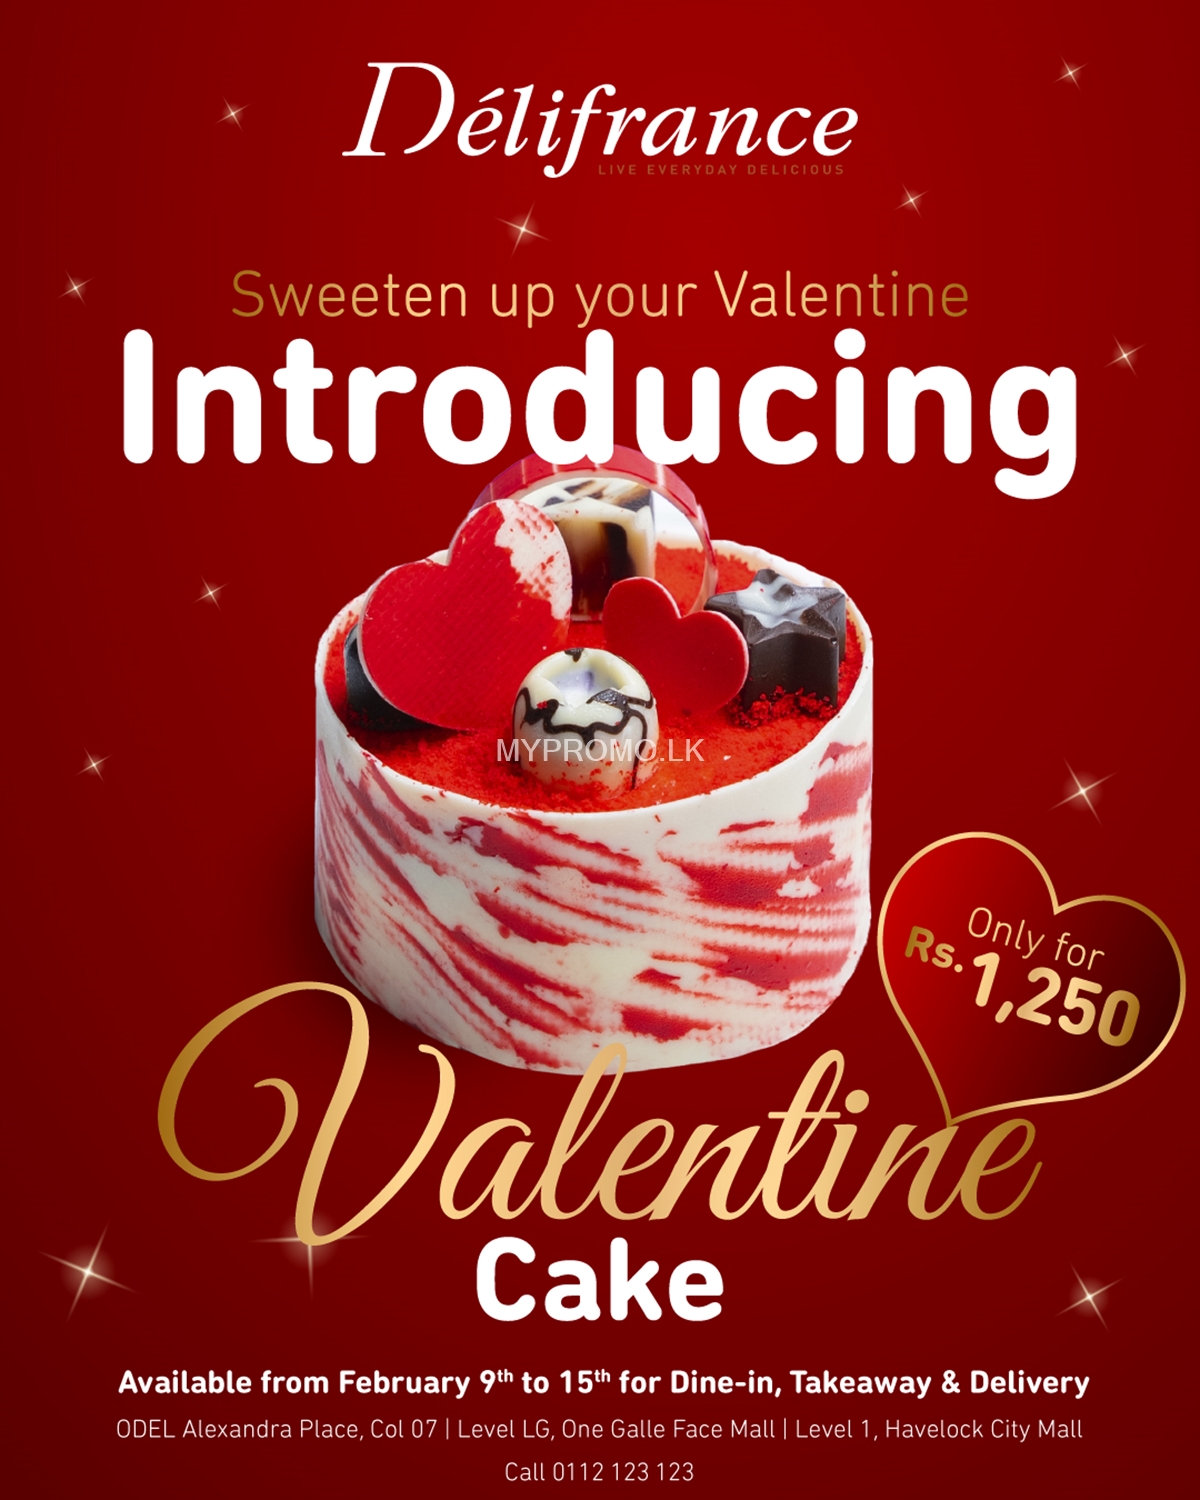 Valentine Cakes from Delifrance